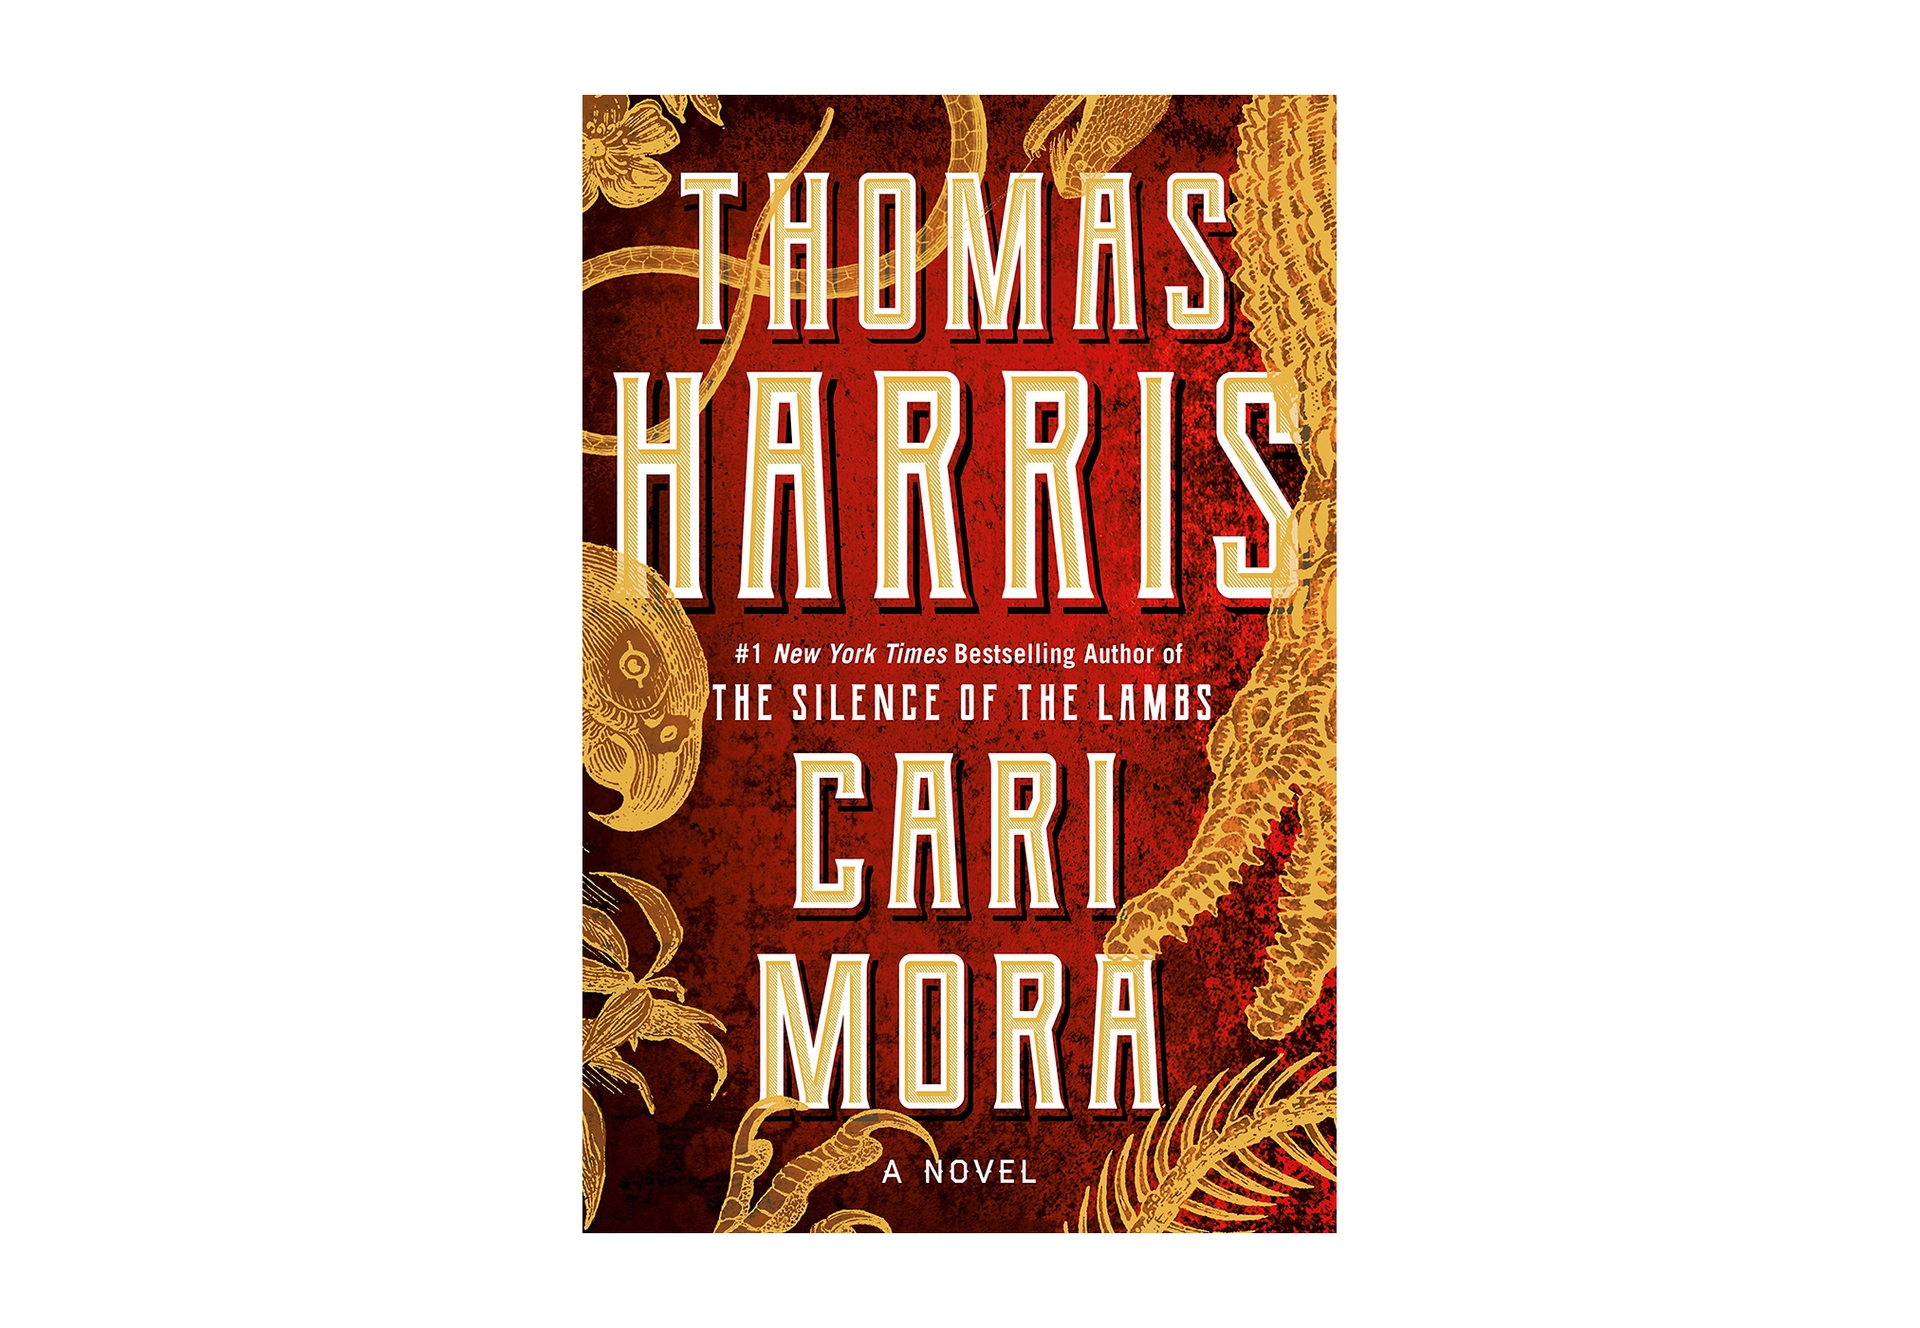 Book cover for the novel "Cari Mora" shows tall, ivory letters with the author's name, and the book title. The background is a deep red, with golden plant leaves swirling about.